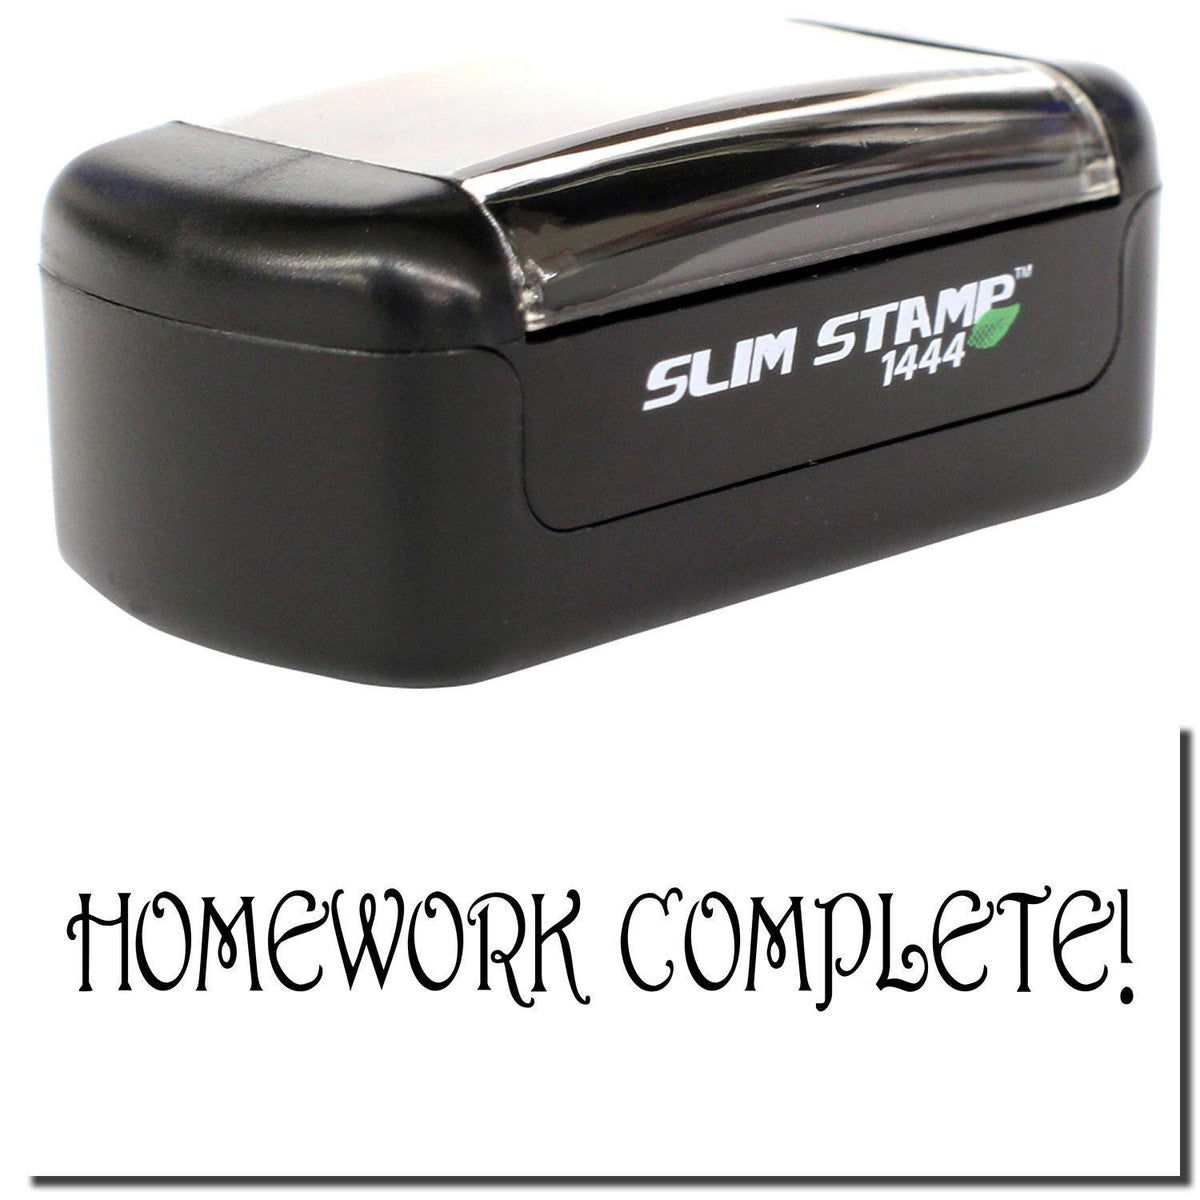 A stock office pre-inked stamp with a stamped image showing how the text &quot;HOMEWORK COMPLETE!&quot; is displayed after stamping.